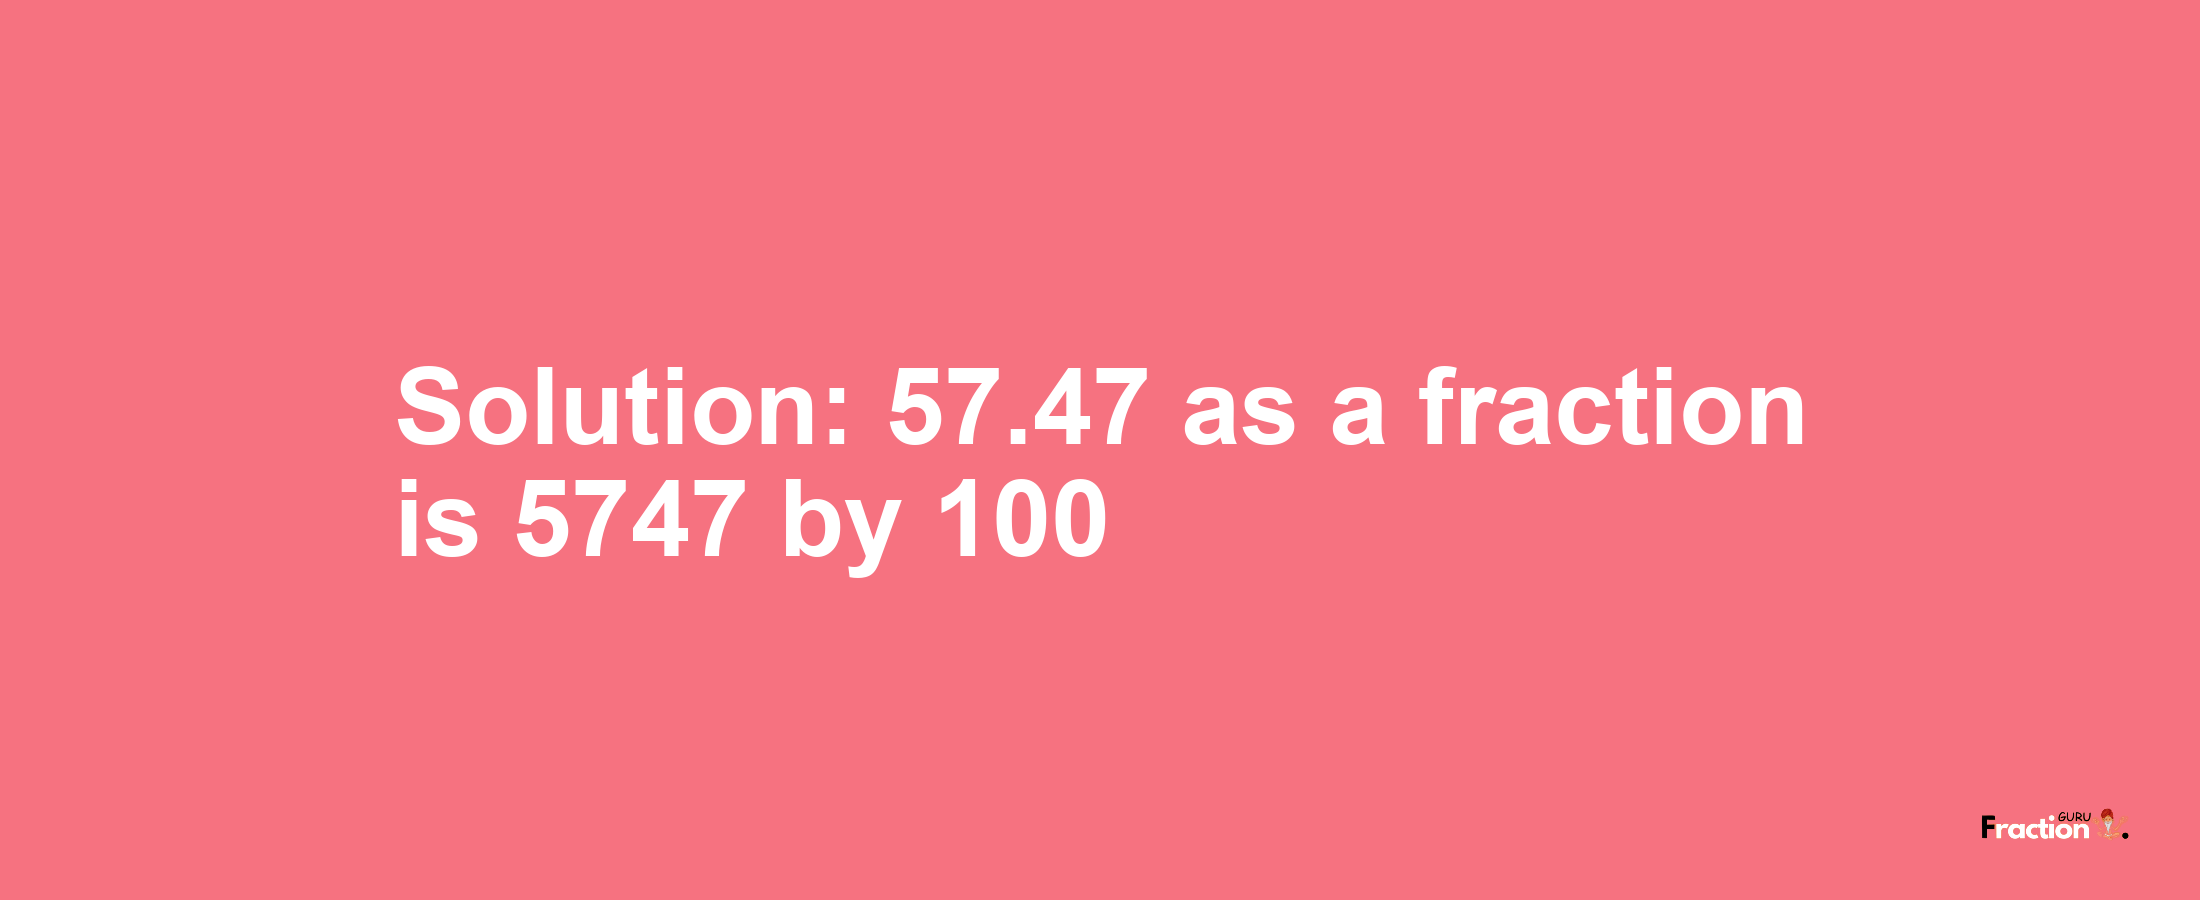 Solution:57.47 as a fraction is 5747/100